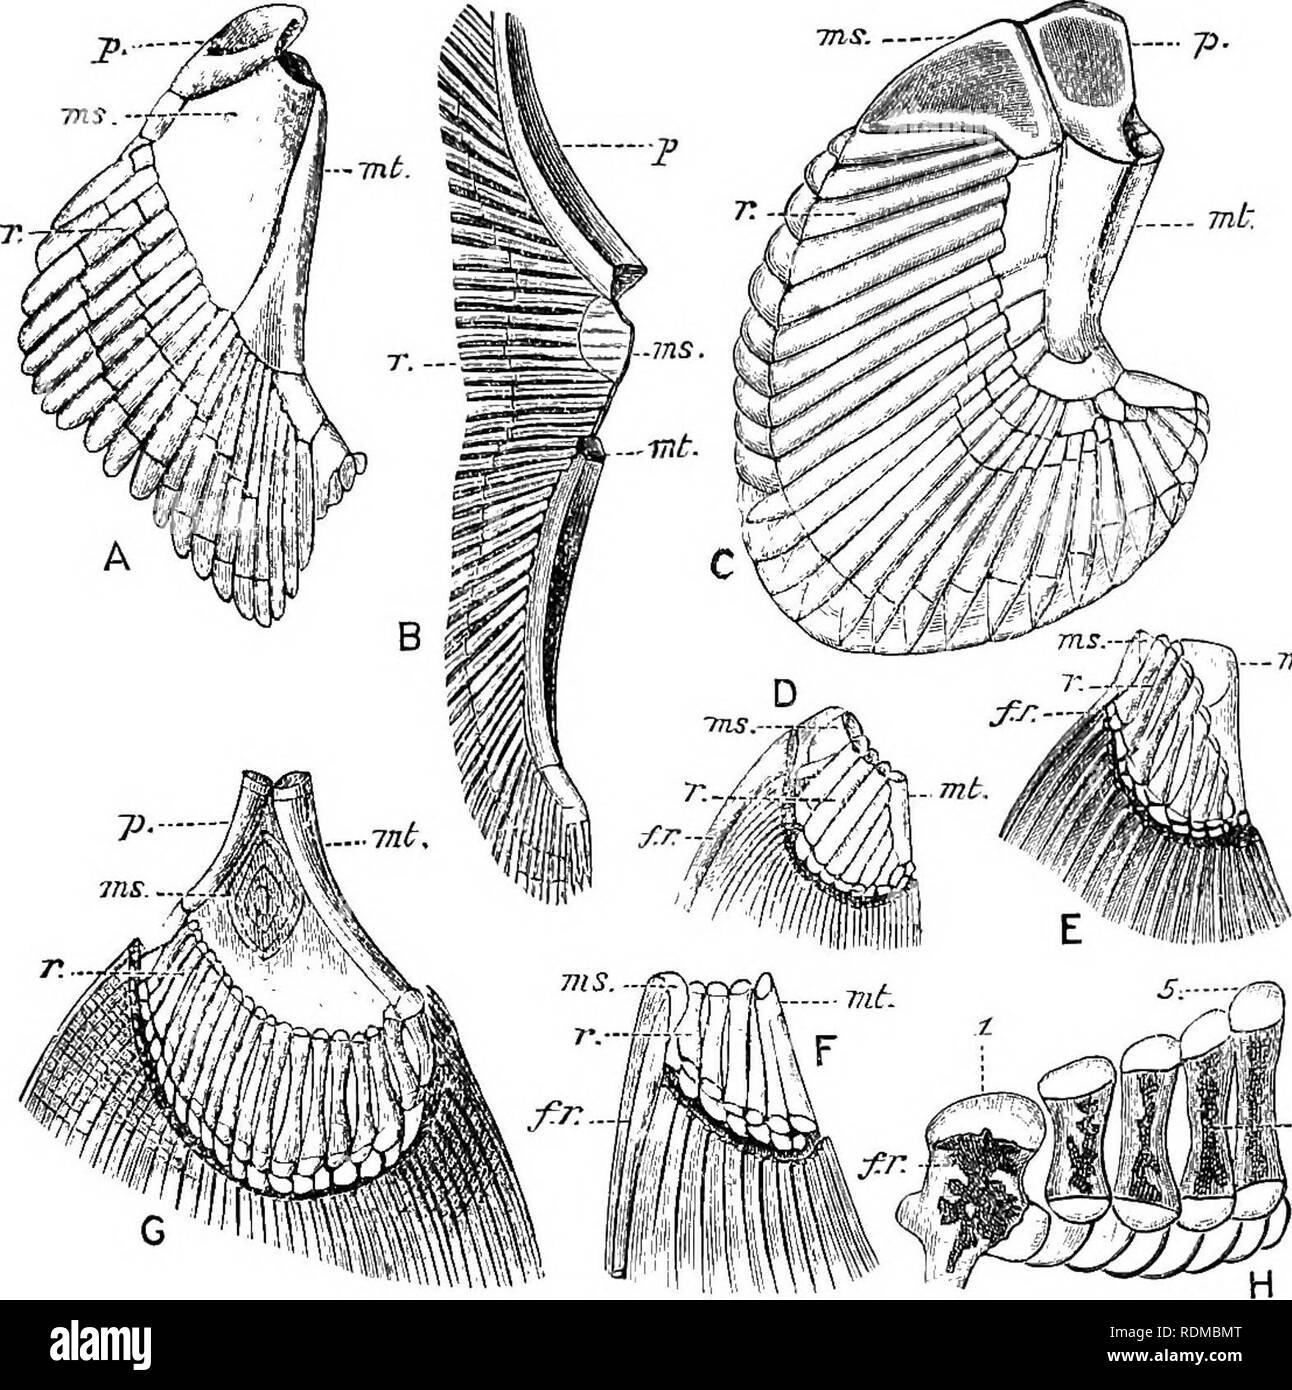 . The Cambridge natural history. Zoology. PECTORAL FINS 243 (Fig. 146, G) is uniserial, closely resembling that of the more typical Elasmobranchs.^ There are three basal elements, a pro- pterygium, a mesopterygium, and a metapterygium, each of which supports a series of partially ossified radialia. Little is. Fig. 146.—Pectoral fins of various Fishes. A, Acanihias vulgaris; B, Haia sp. ; C, Chimaera monstrosa; D, Acipenser rhyac/iaeus; E, Amia calva; F, Lepidosteus platyrhynchus; G, Polypterus hichir; H, Scdmo salvdinus. The preaxial side of each flu is to the left and the postaxial to the rig Stock Photo